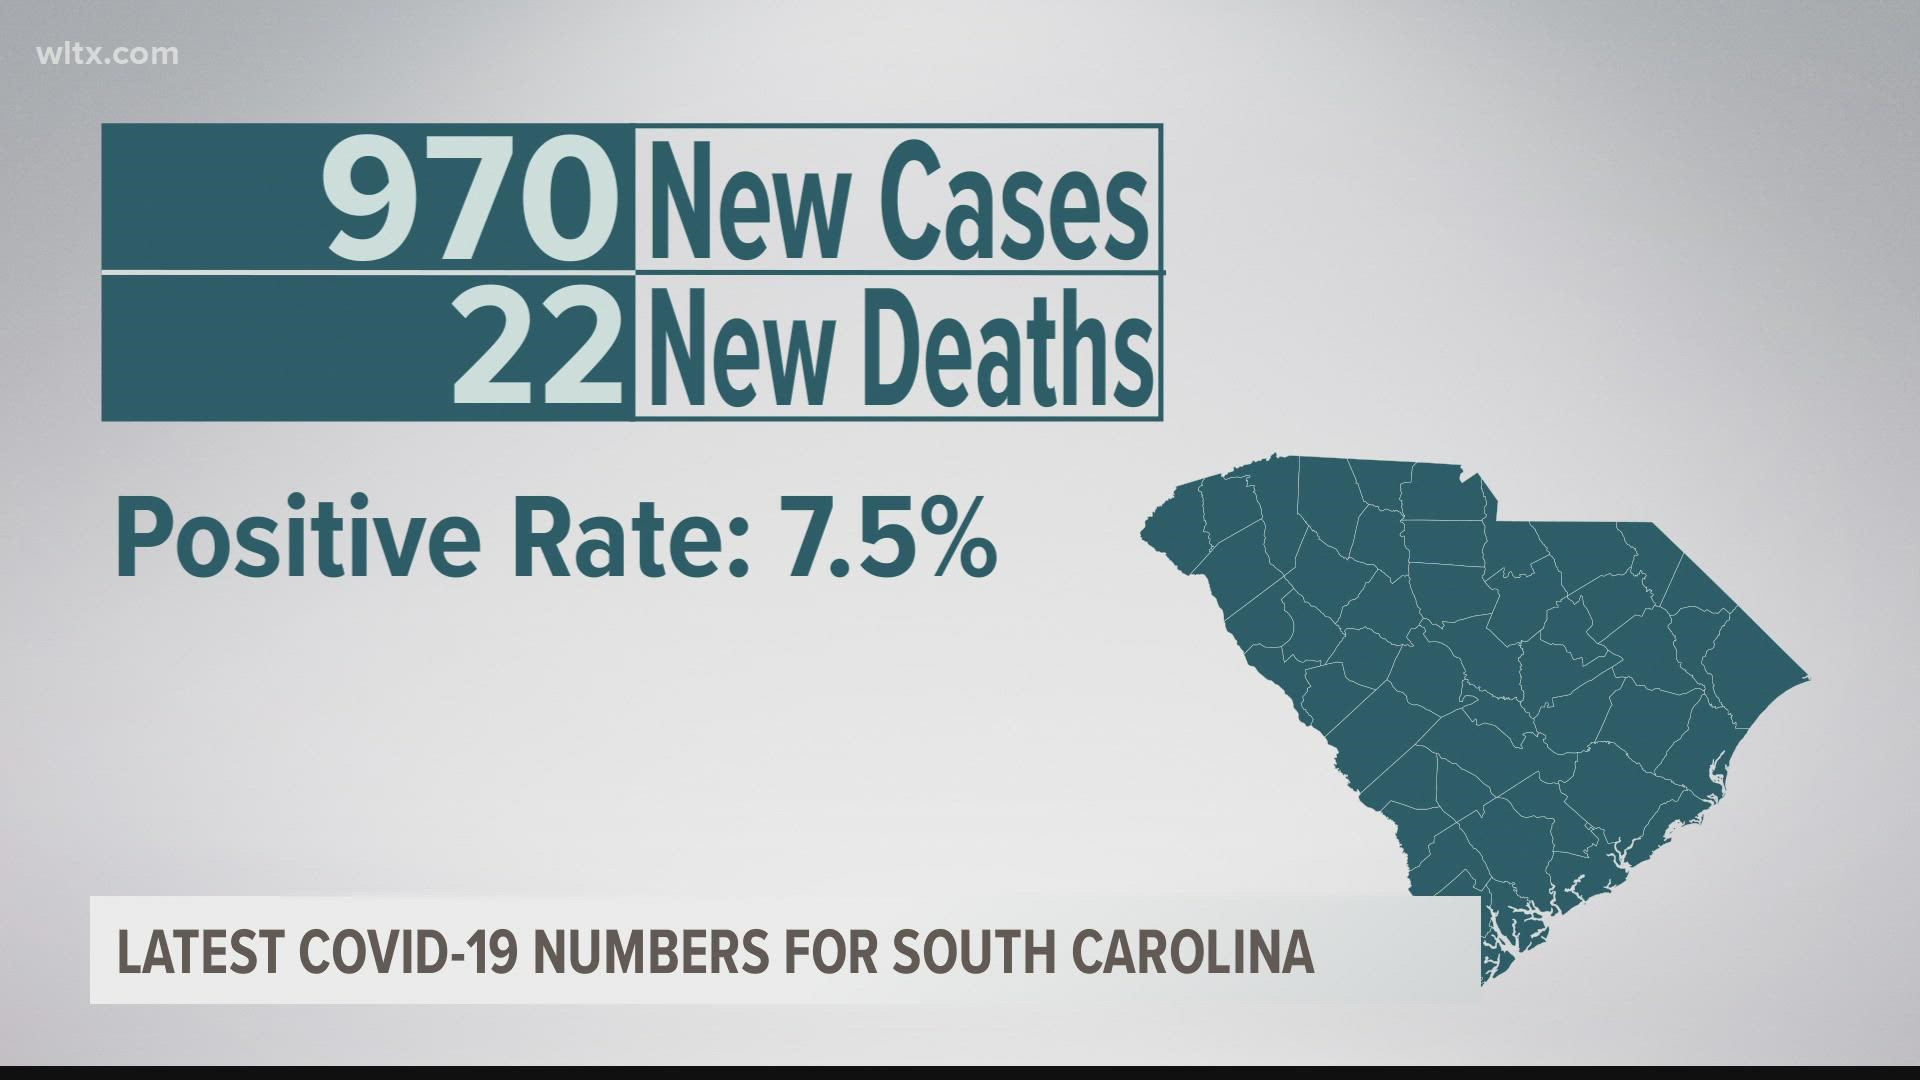 The last time South Carolina saw a total of coronavirus cases less than 1,000 was back in July.